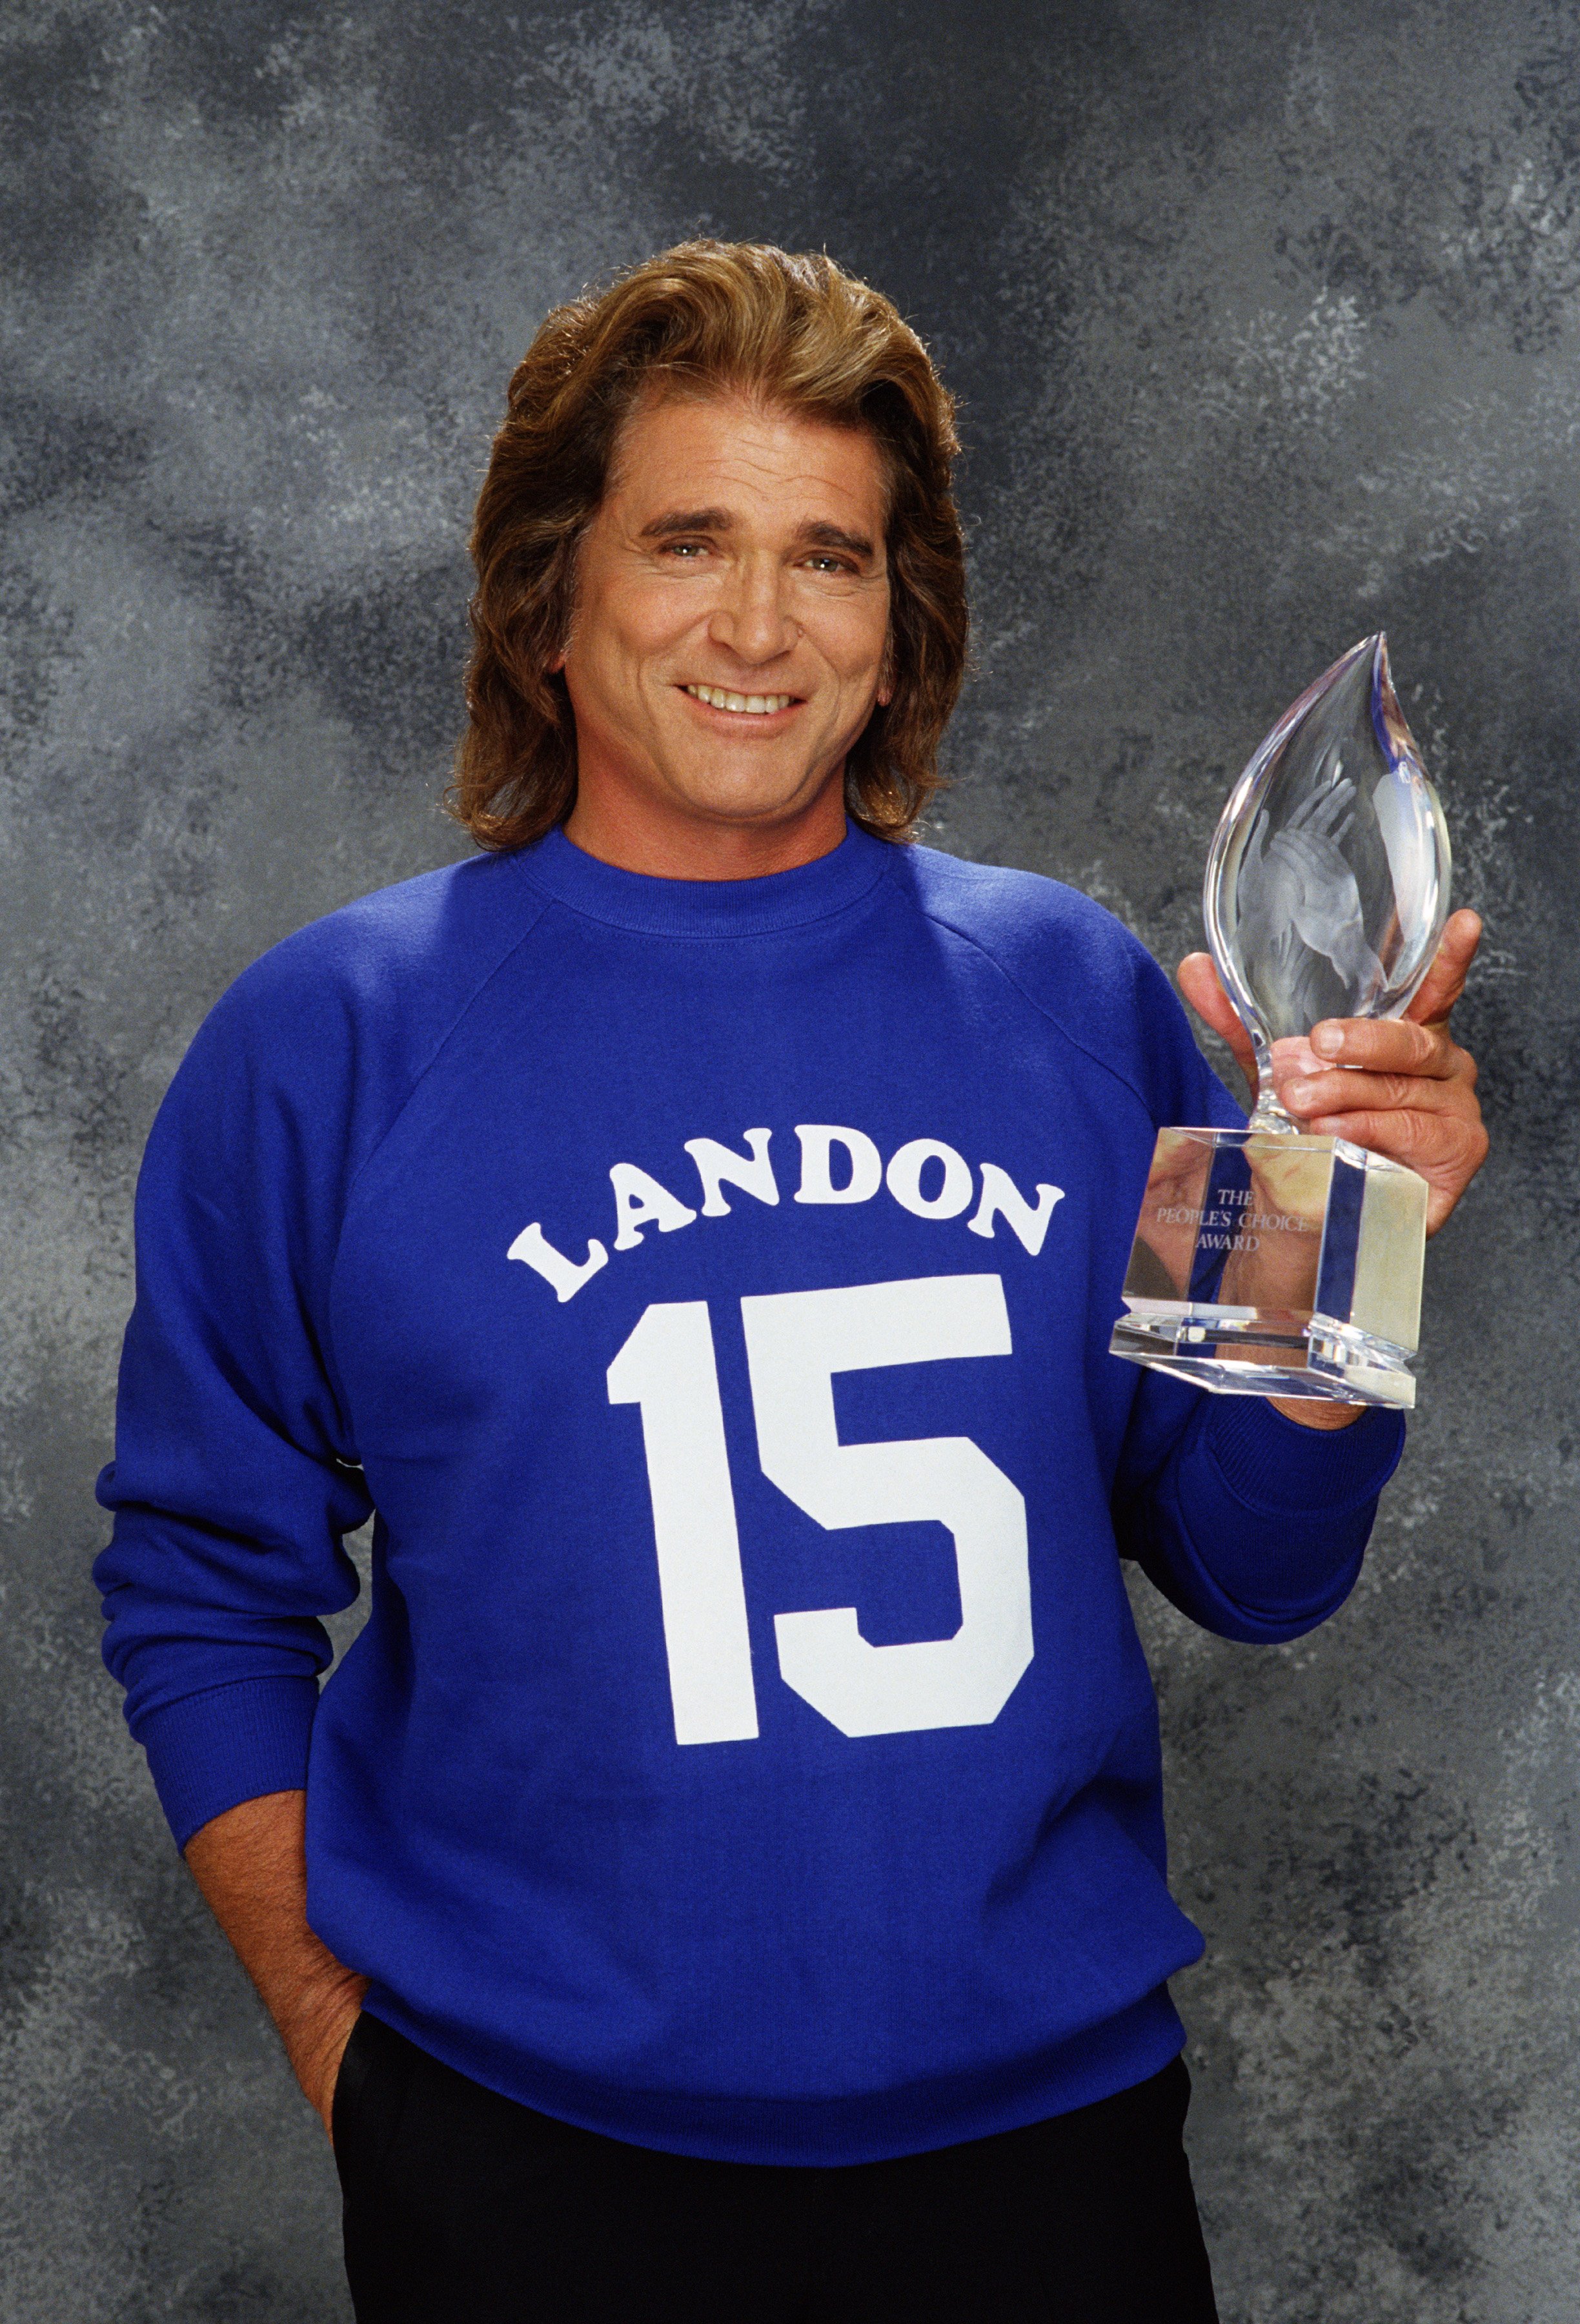 Actor Michael Landon poses with the People's Choice Award during a photo portrait session in 1989 Beverly Hills, California,| Photo: Getty Images